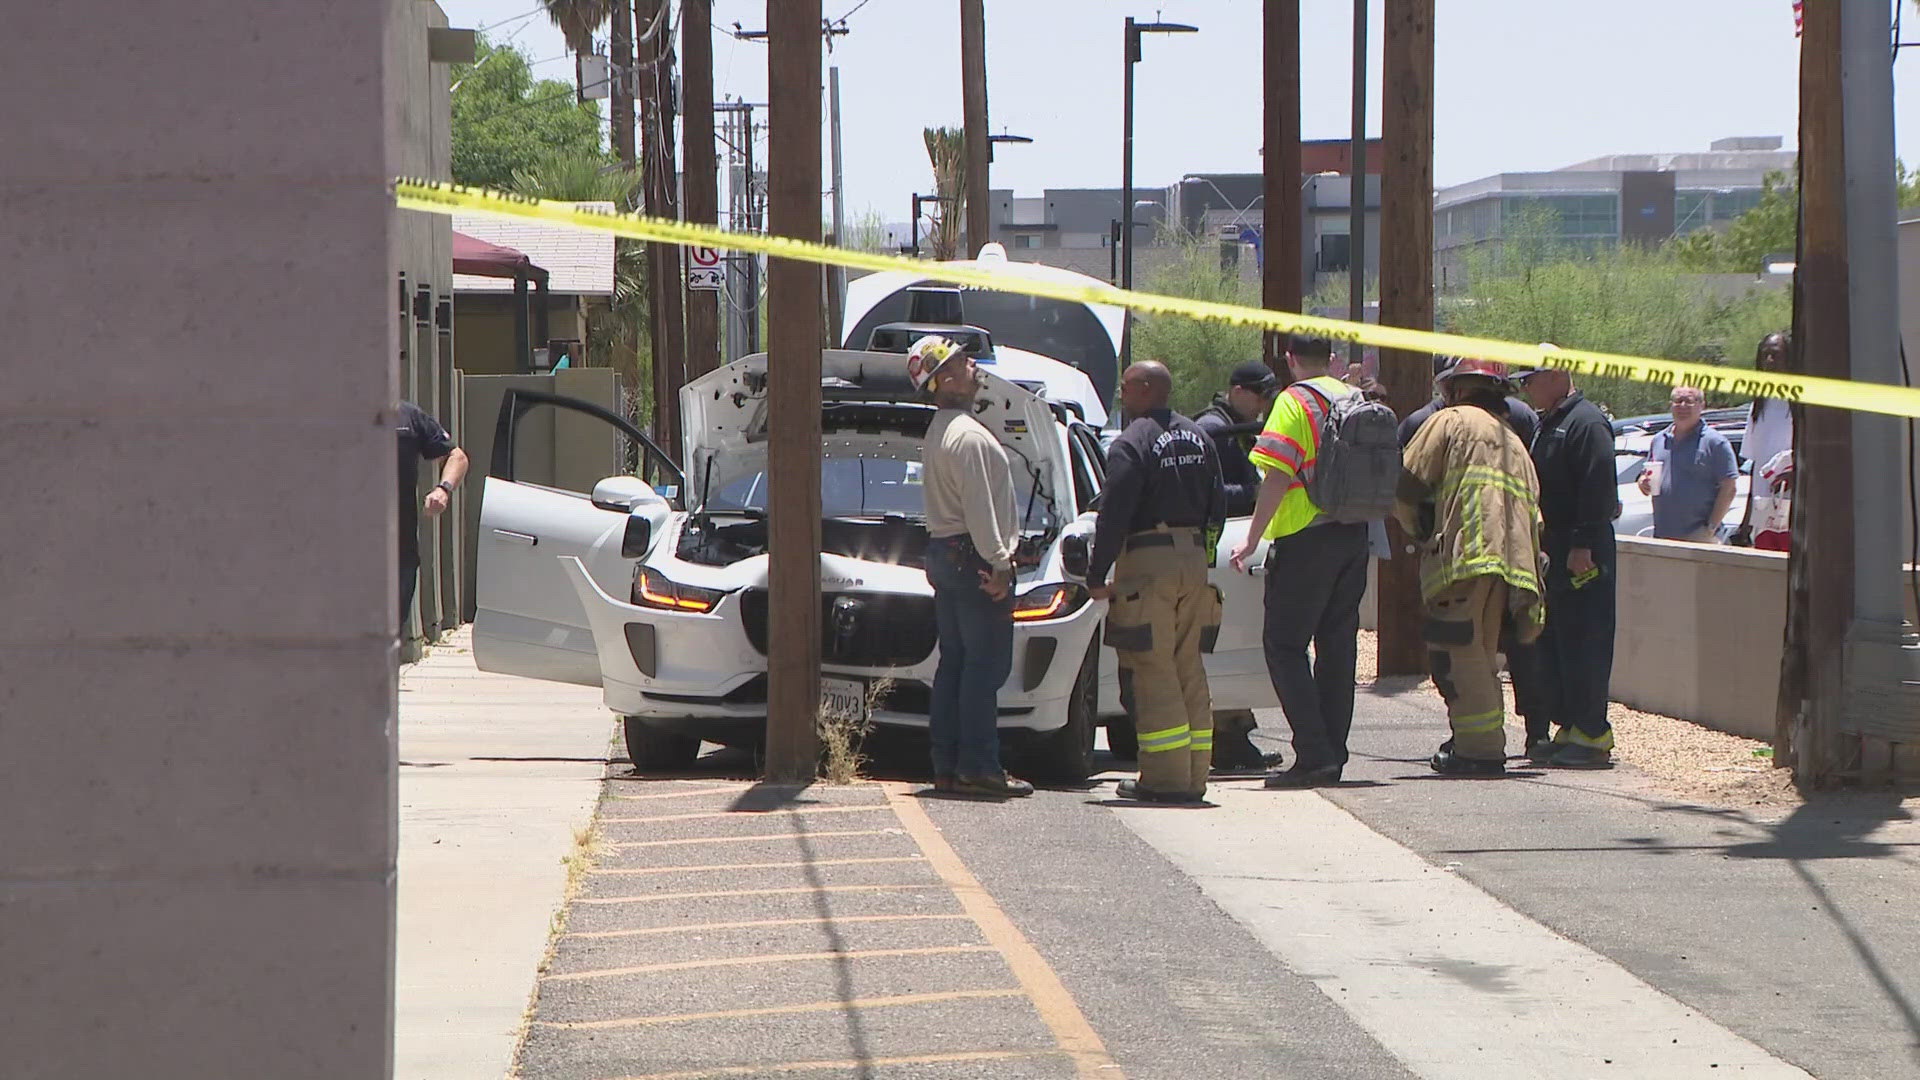 One of Waymo's self-driving cars crashed into a pole in downtown Phoenix on Tuesday.